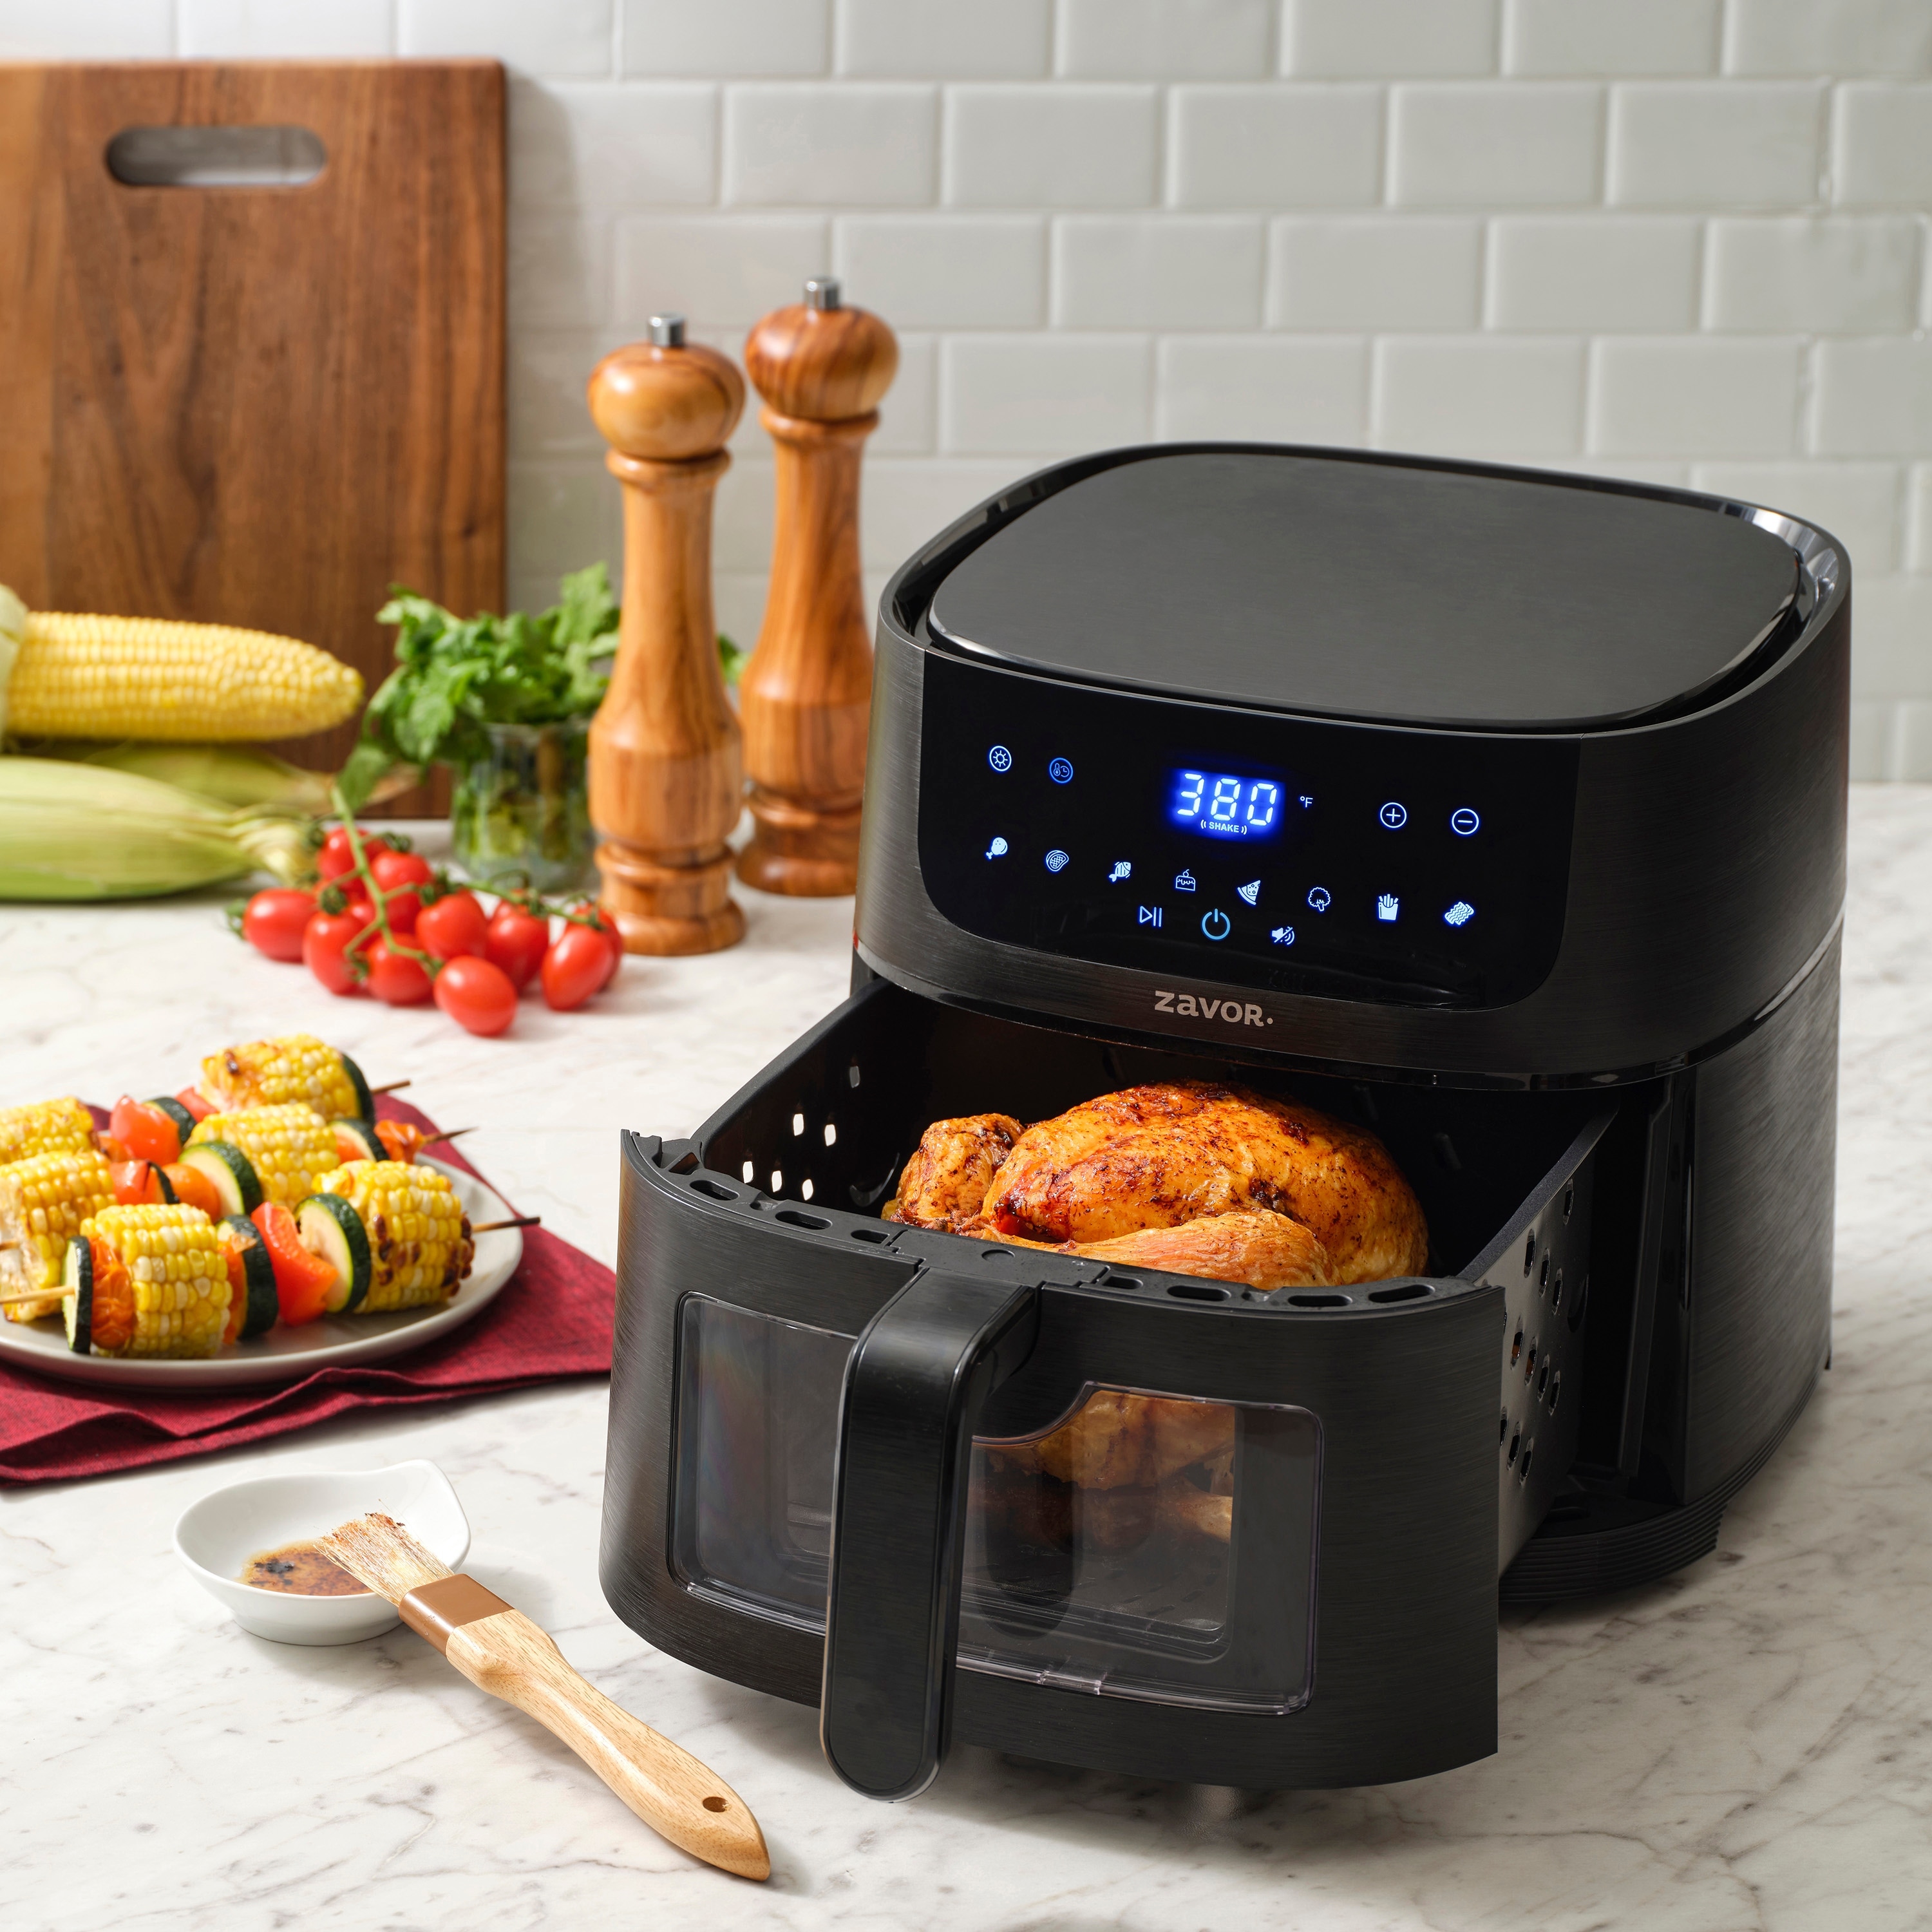 WHALL Air Fryer, 6.3Qt Air Fryer Oven with LED Digital Touchscreen